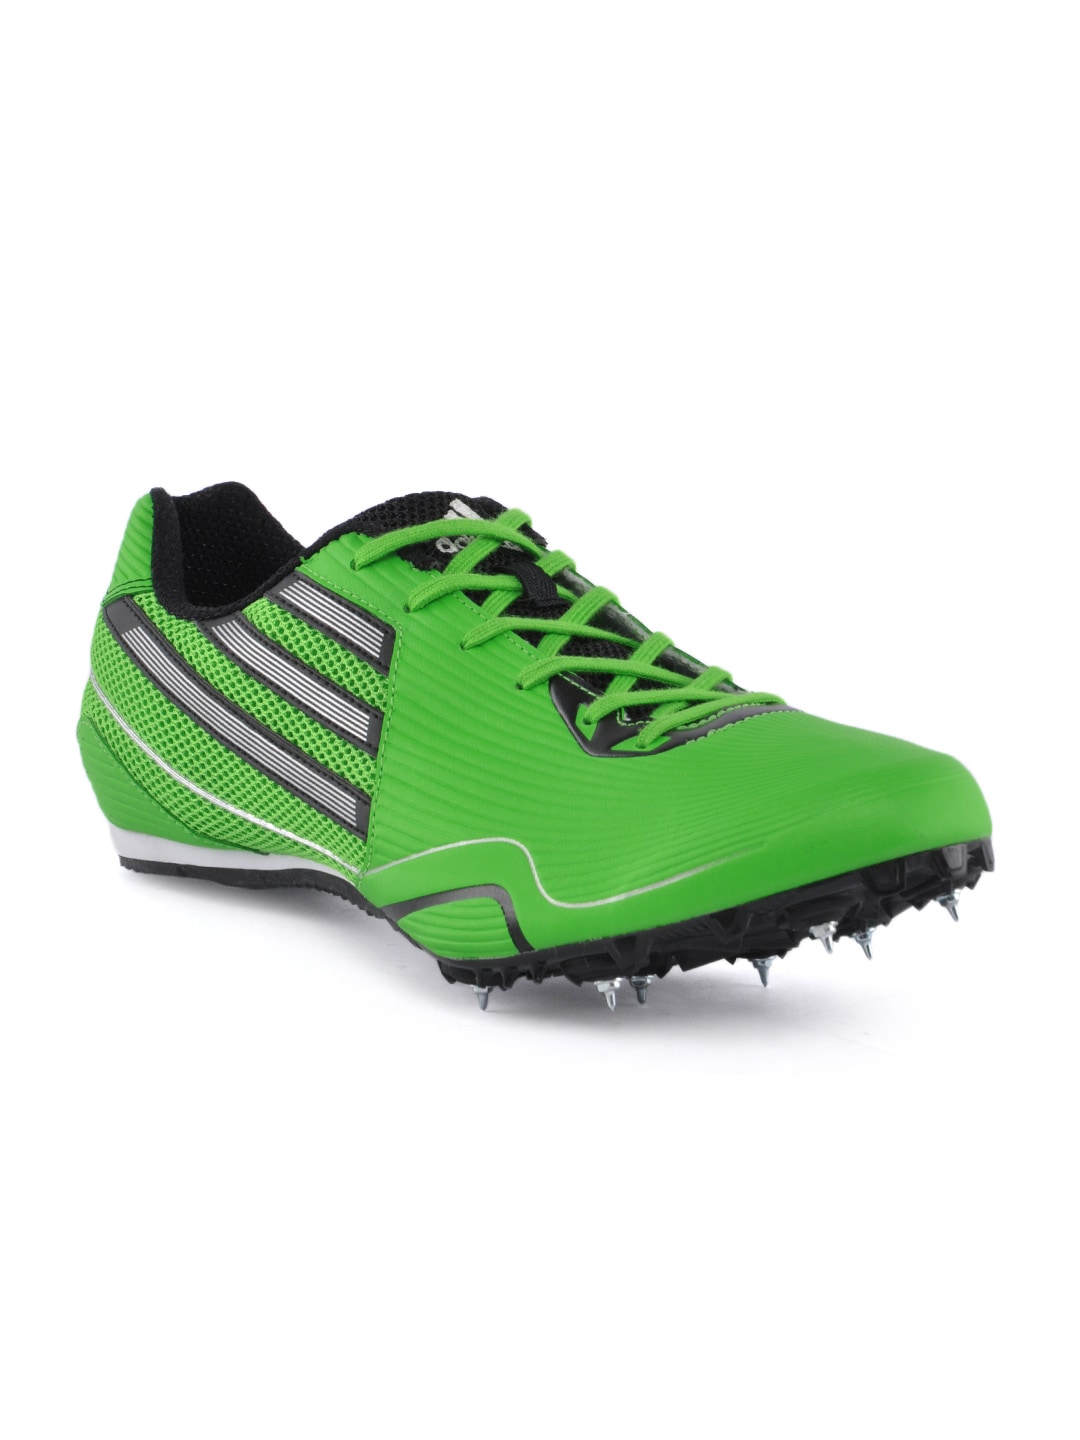 ADIDAS Men Green Spider 2 M Sports Shoes